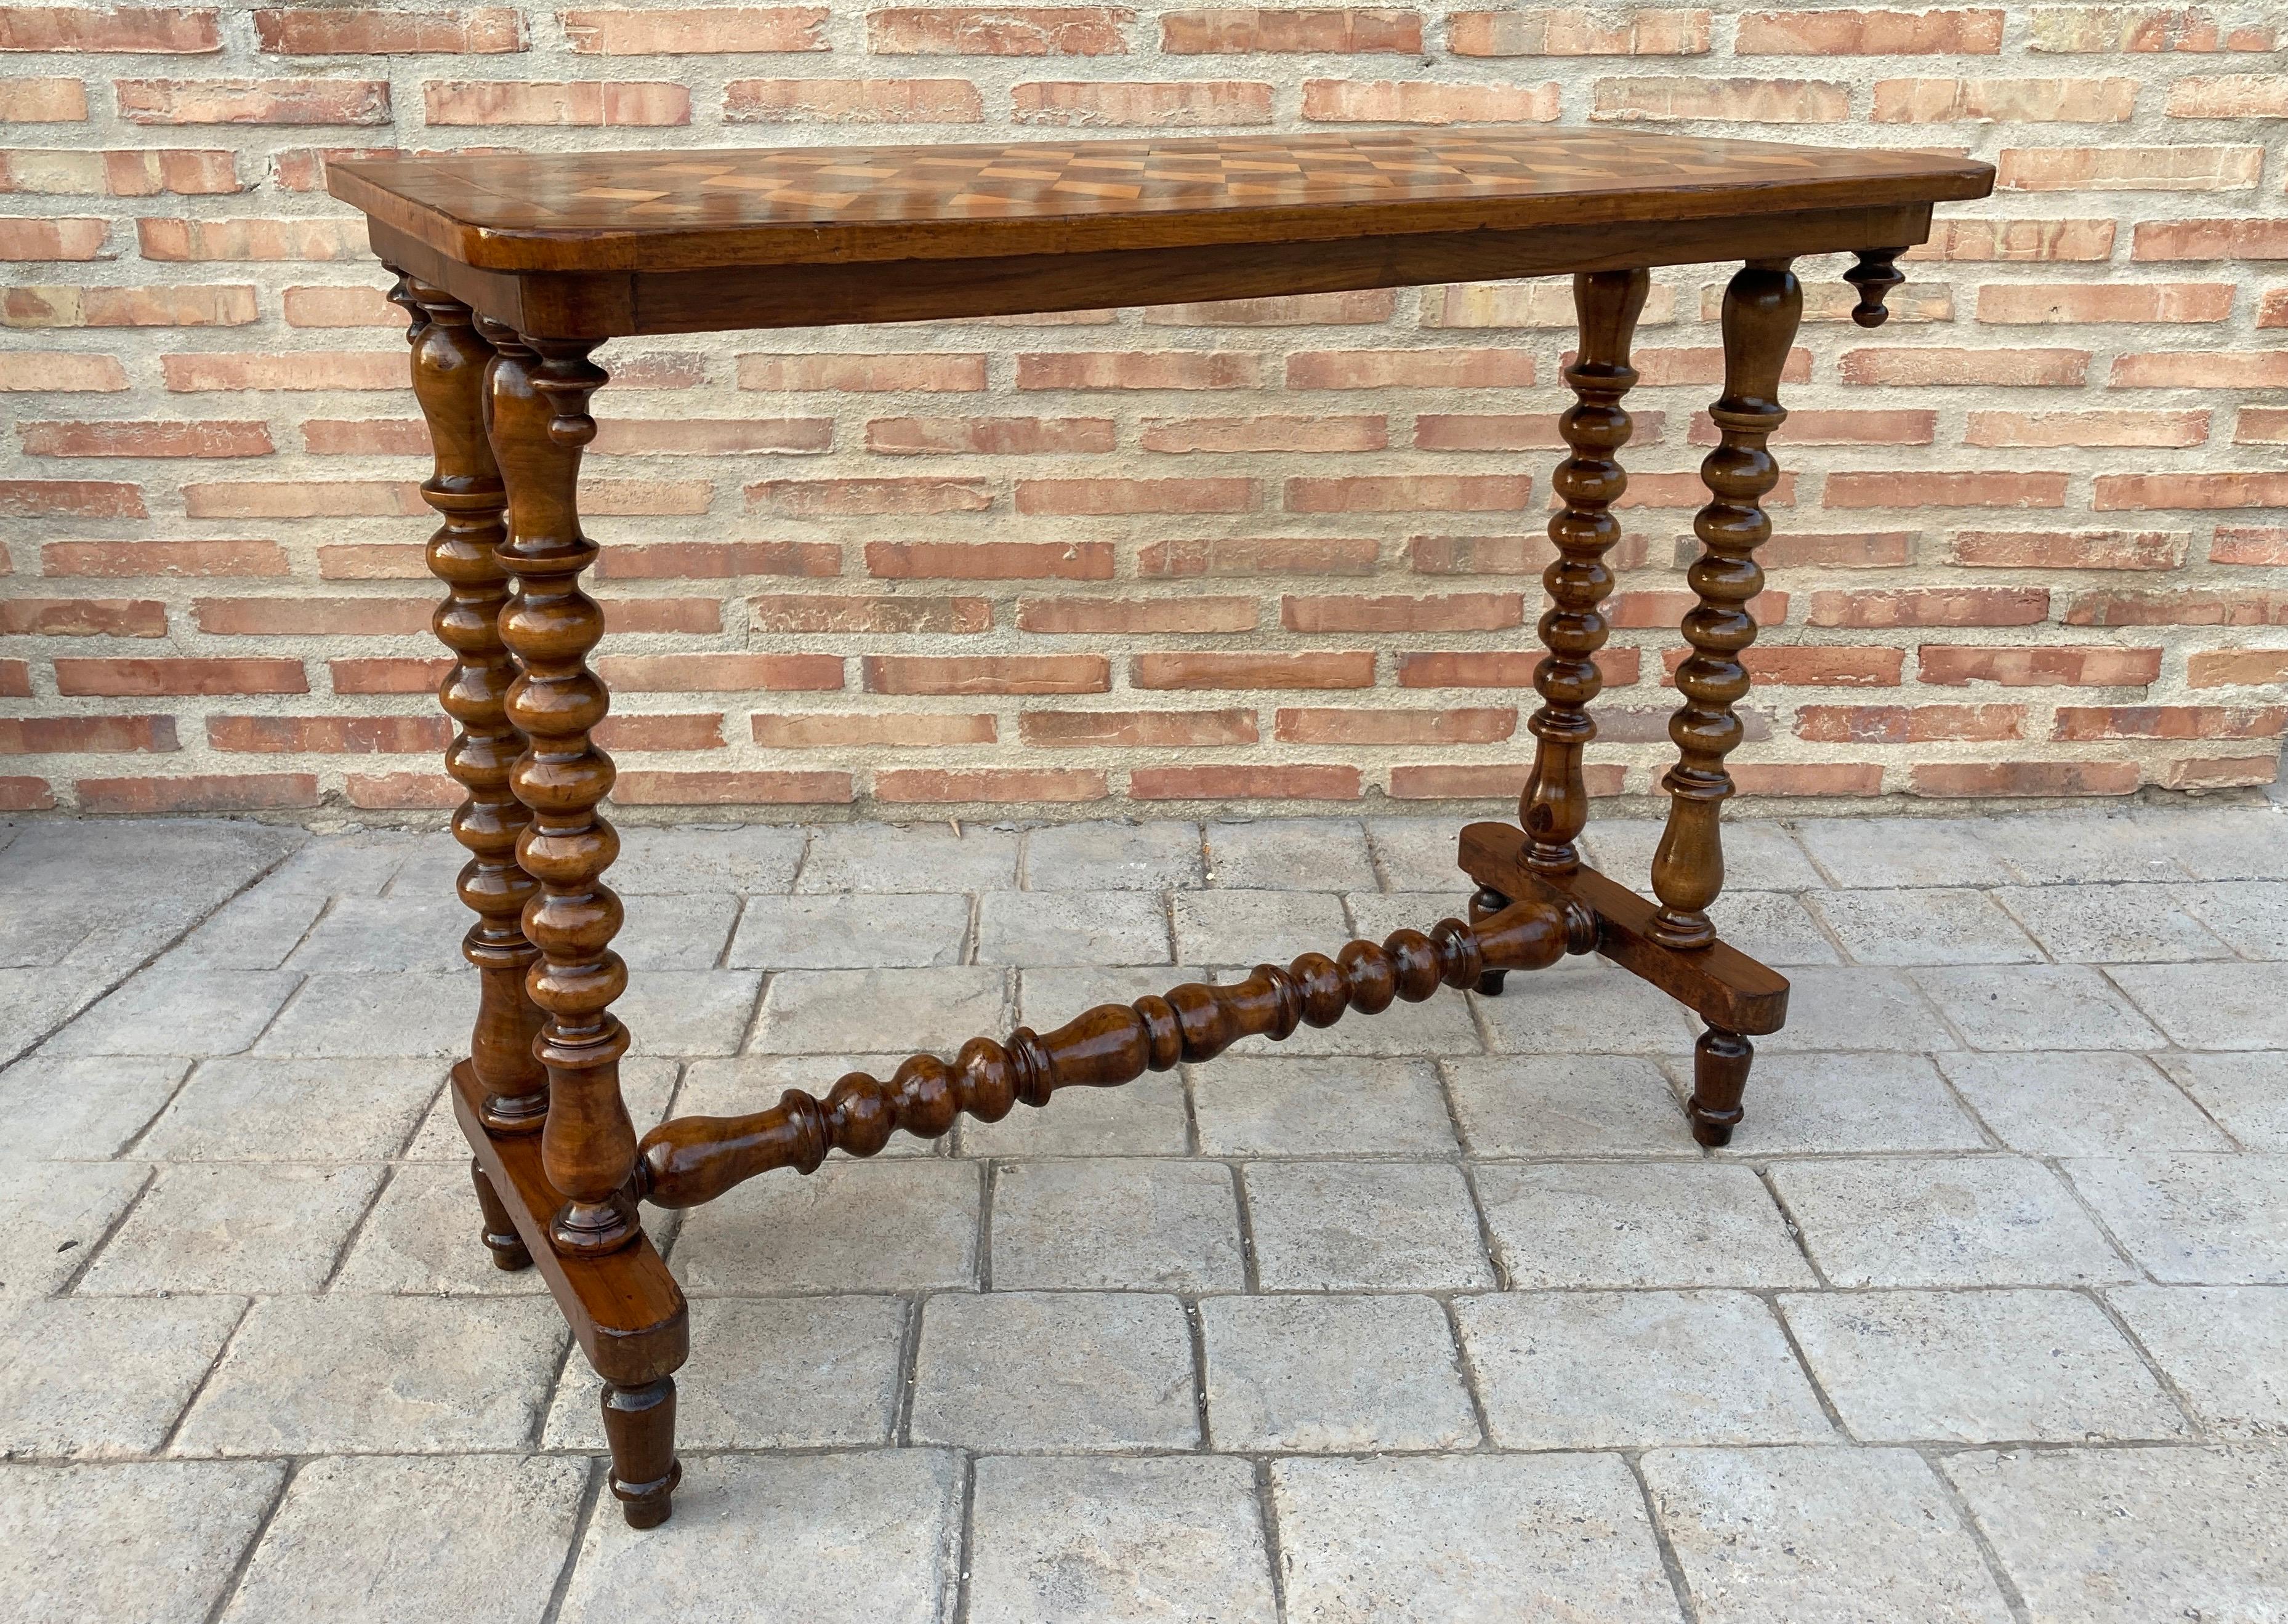 19th Century Spanish console table with parquetry top and turned legs, it has a turned wood stretcher.